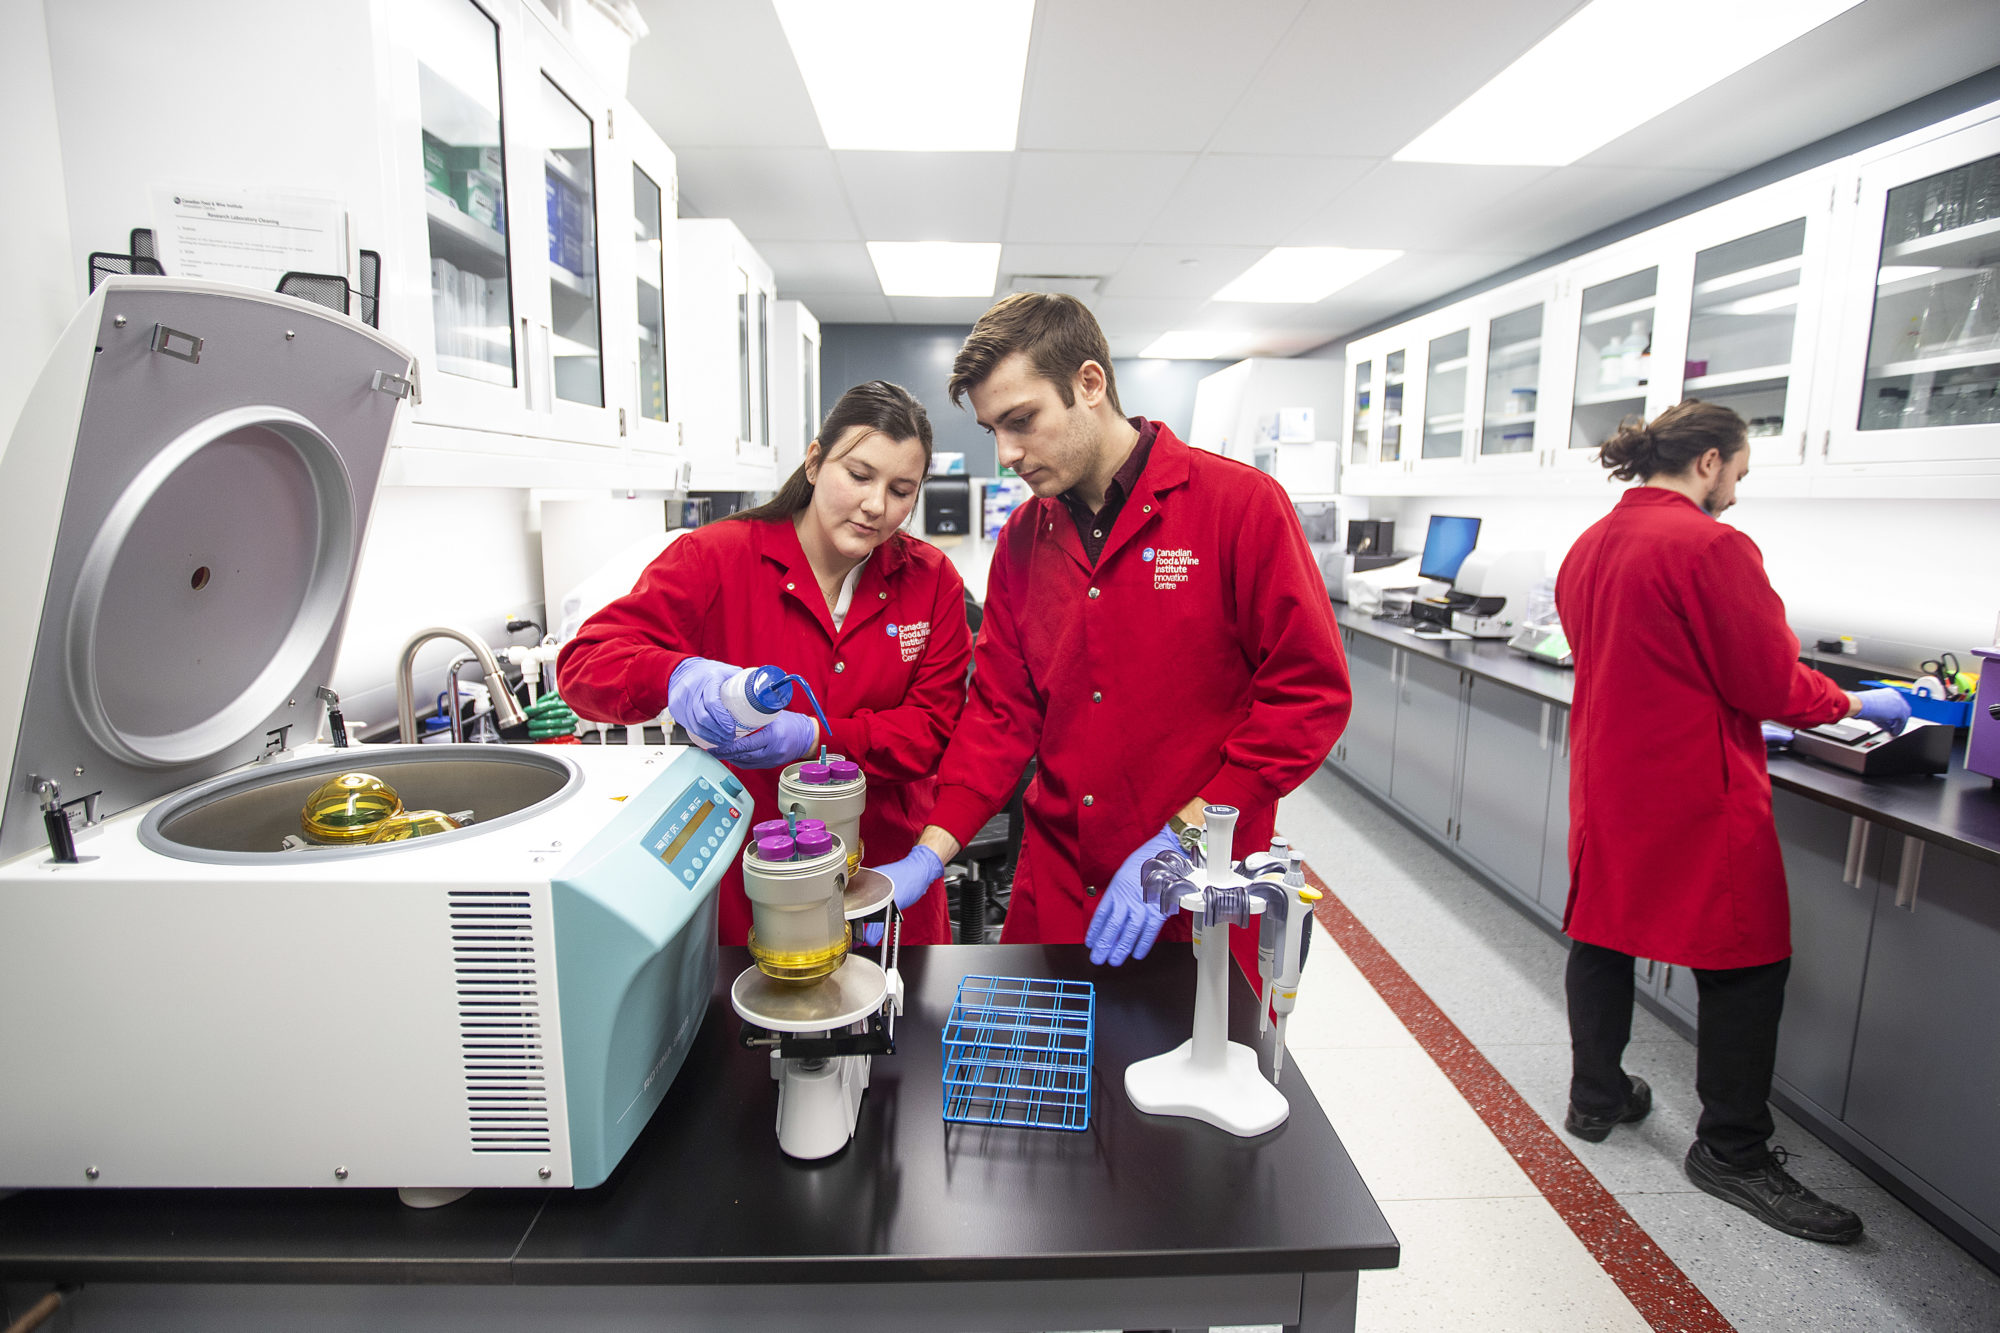 Two students wearing lab coats are working in a research lab.